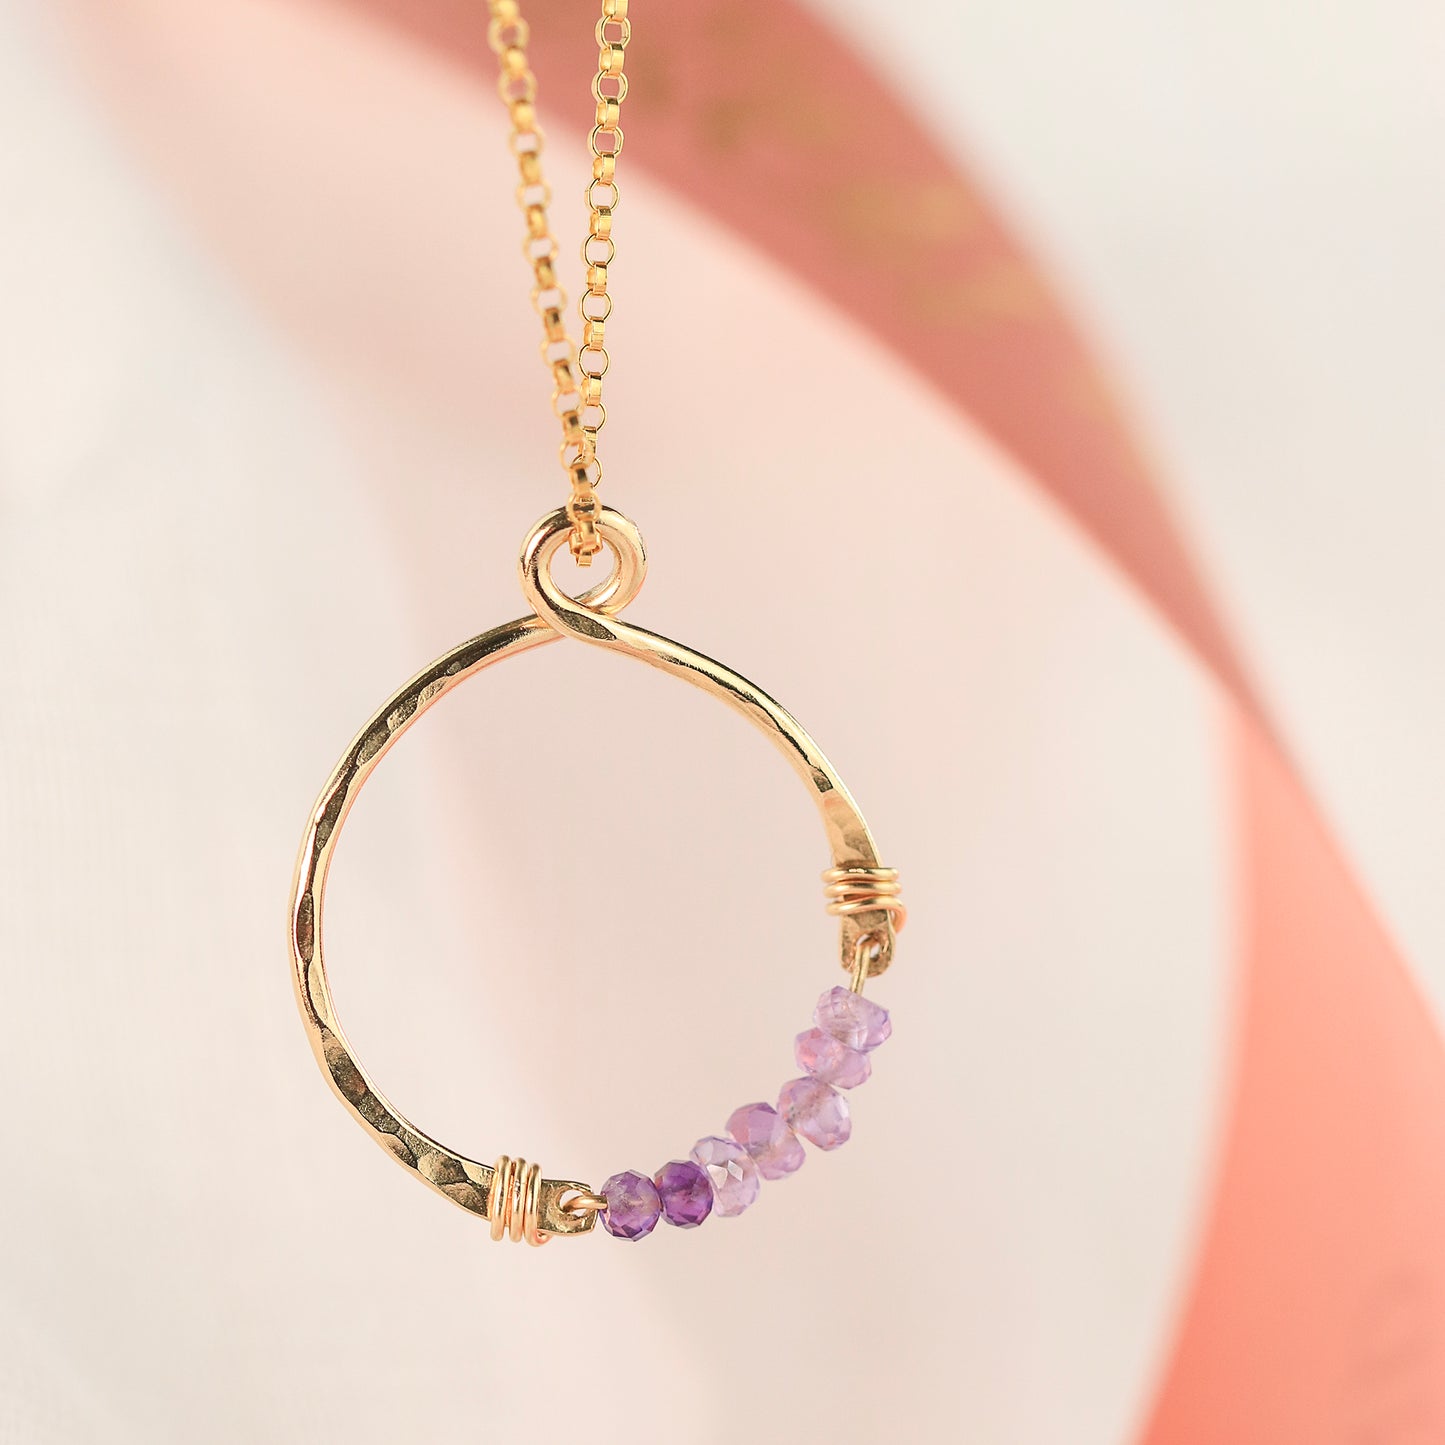 Gift for Granddaughter - Infinity Birthstone Necklace - Silver & Gold